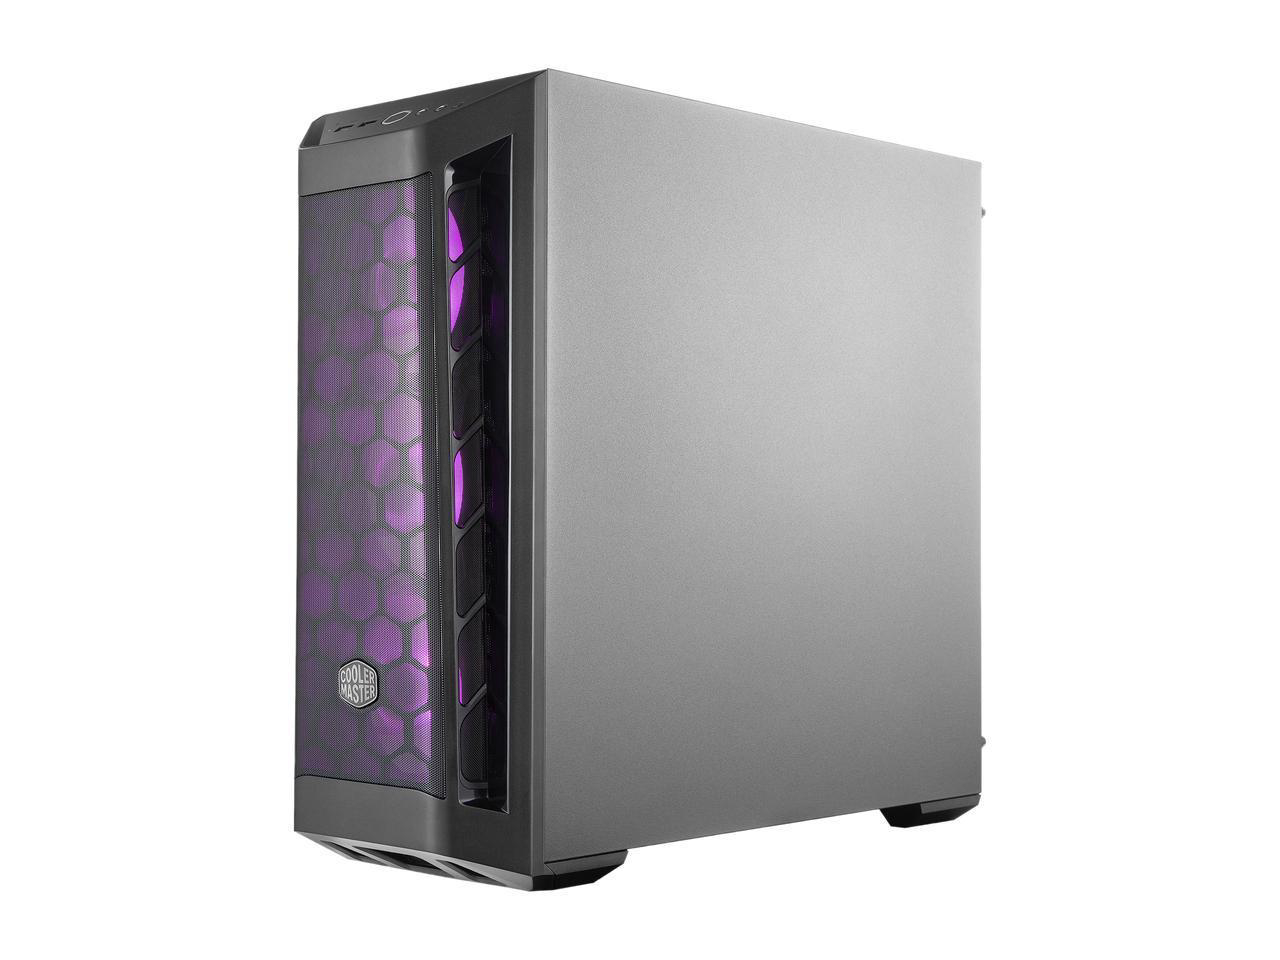 Cooler Master MCB-B511D-KGNN-RGB MasterBox MB511 RGB Systems Built for high Demand Gaming can Breathe Easy Through The mesh Front Panel